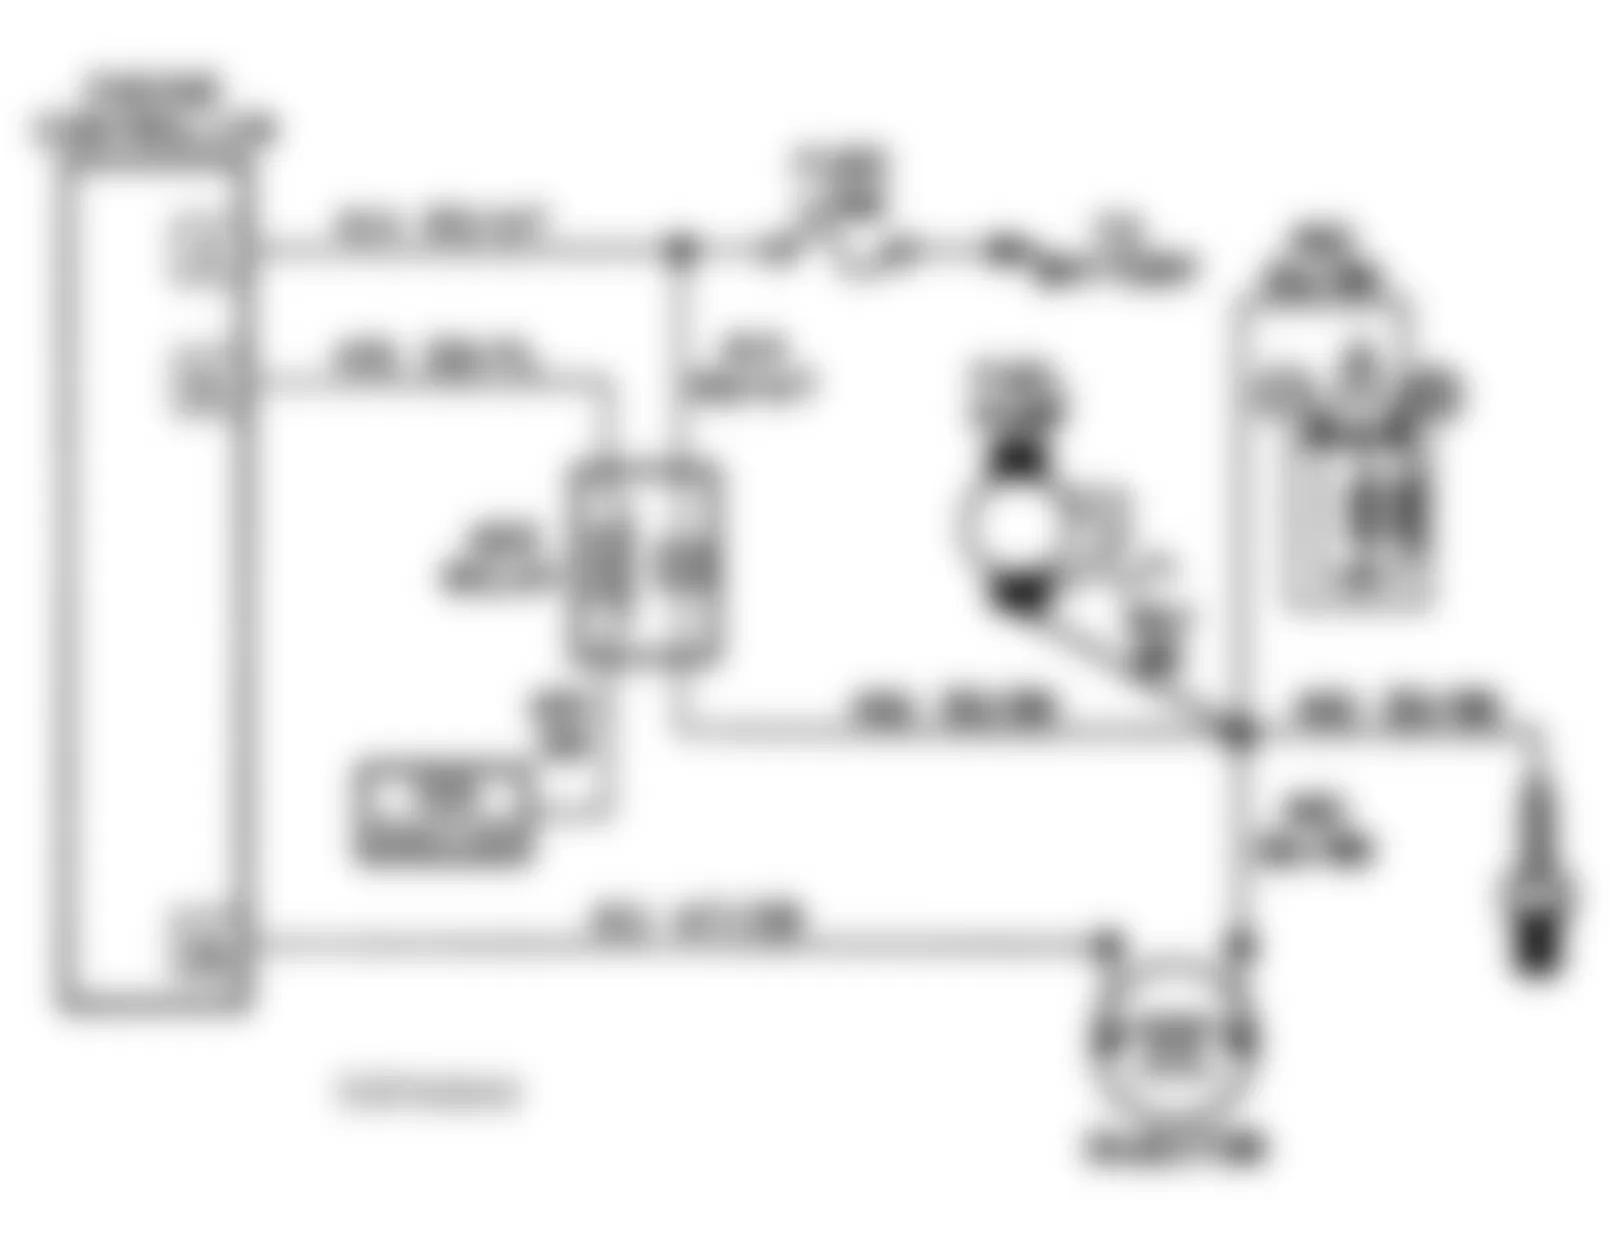 Chrysler LeBaron LX 1991 - Component Locations -  Test NS-7A, Circuit Diagram.